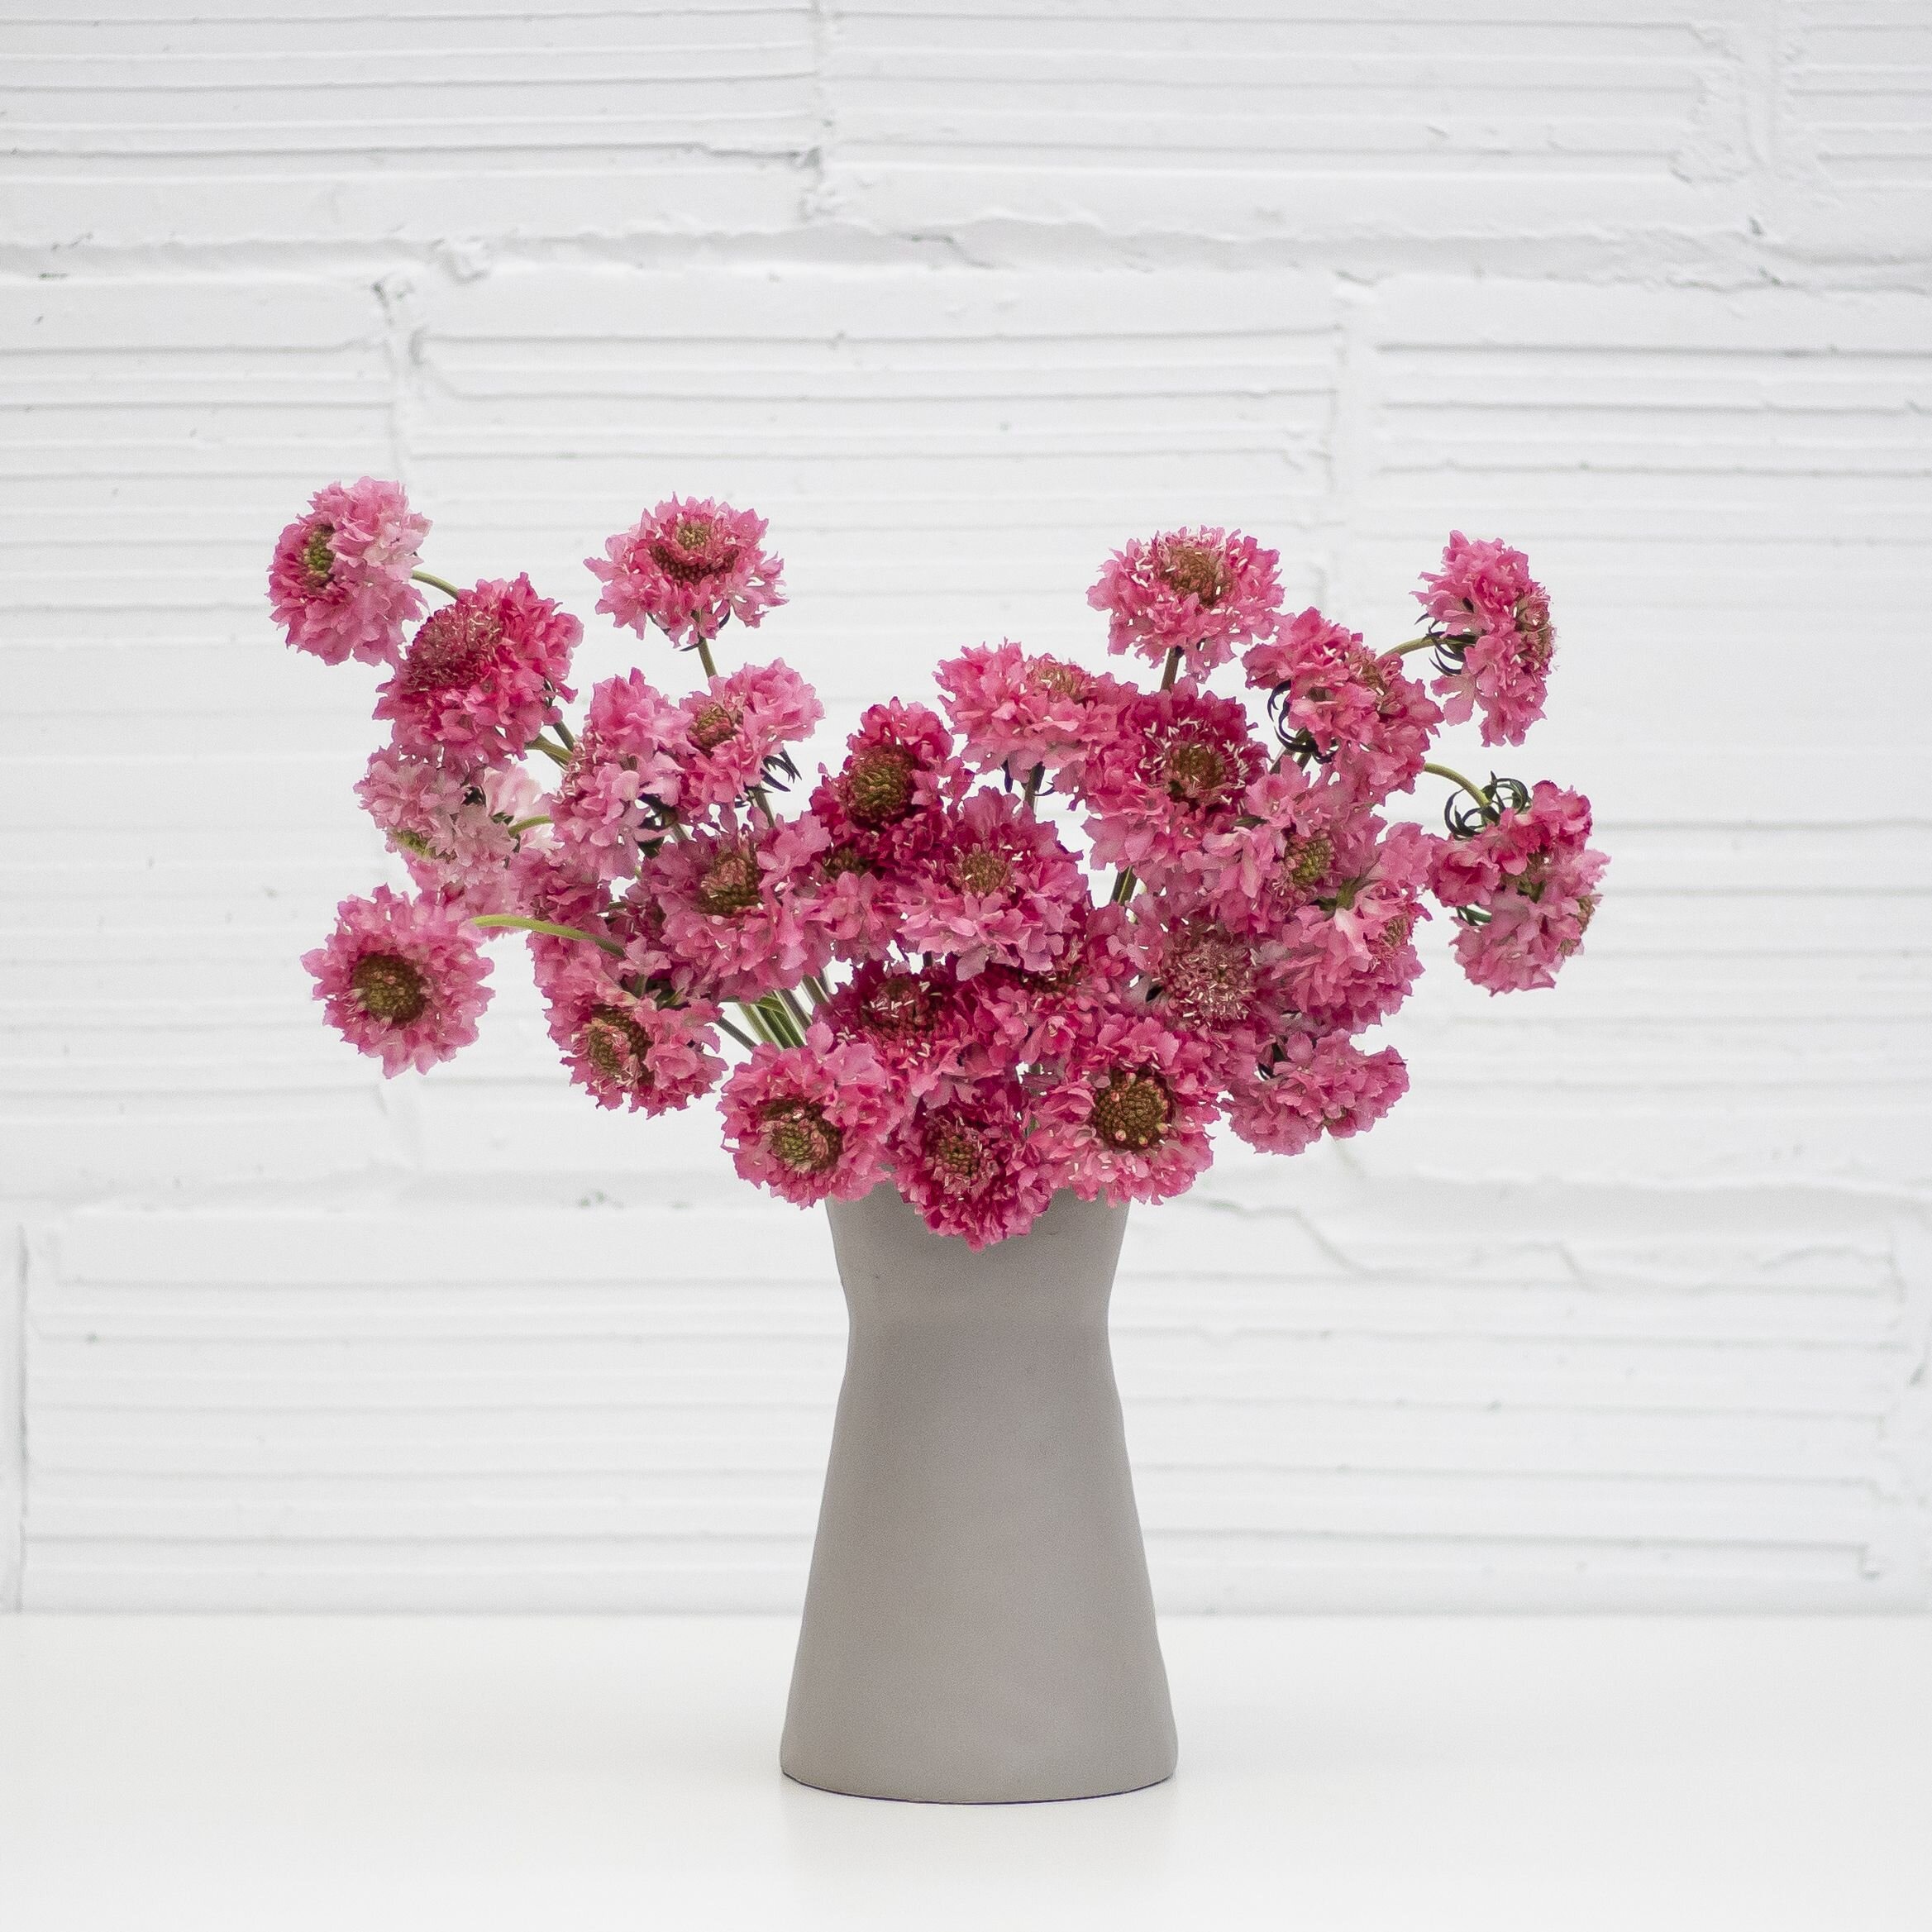 An arrangement of pink scabiosa flowers in a stone vase being placed in front of a white wall